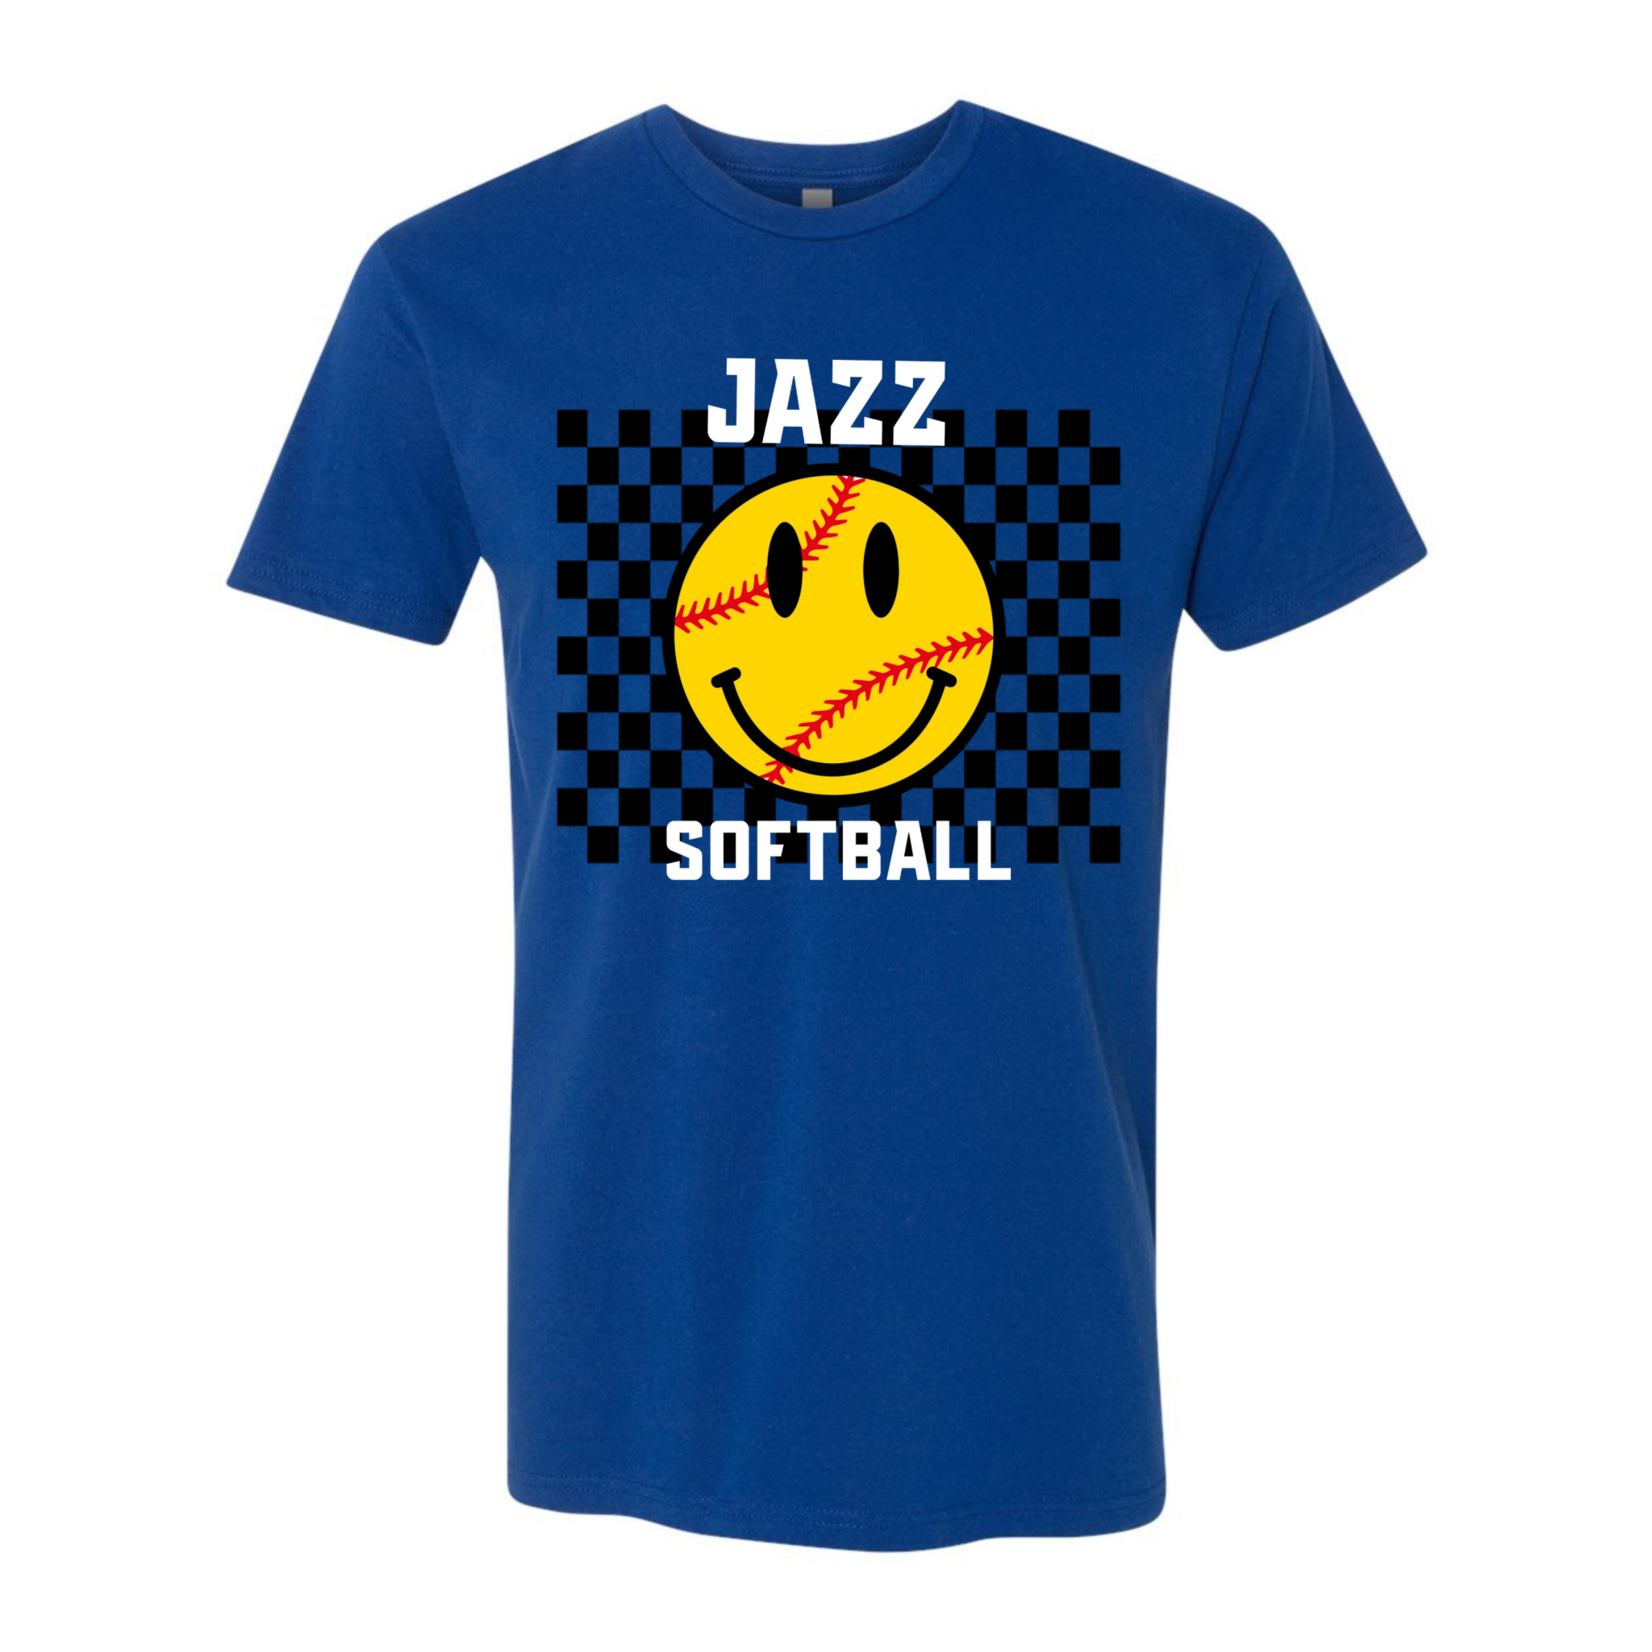 Jazz Checker Adult/Youth Tee